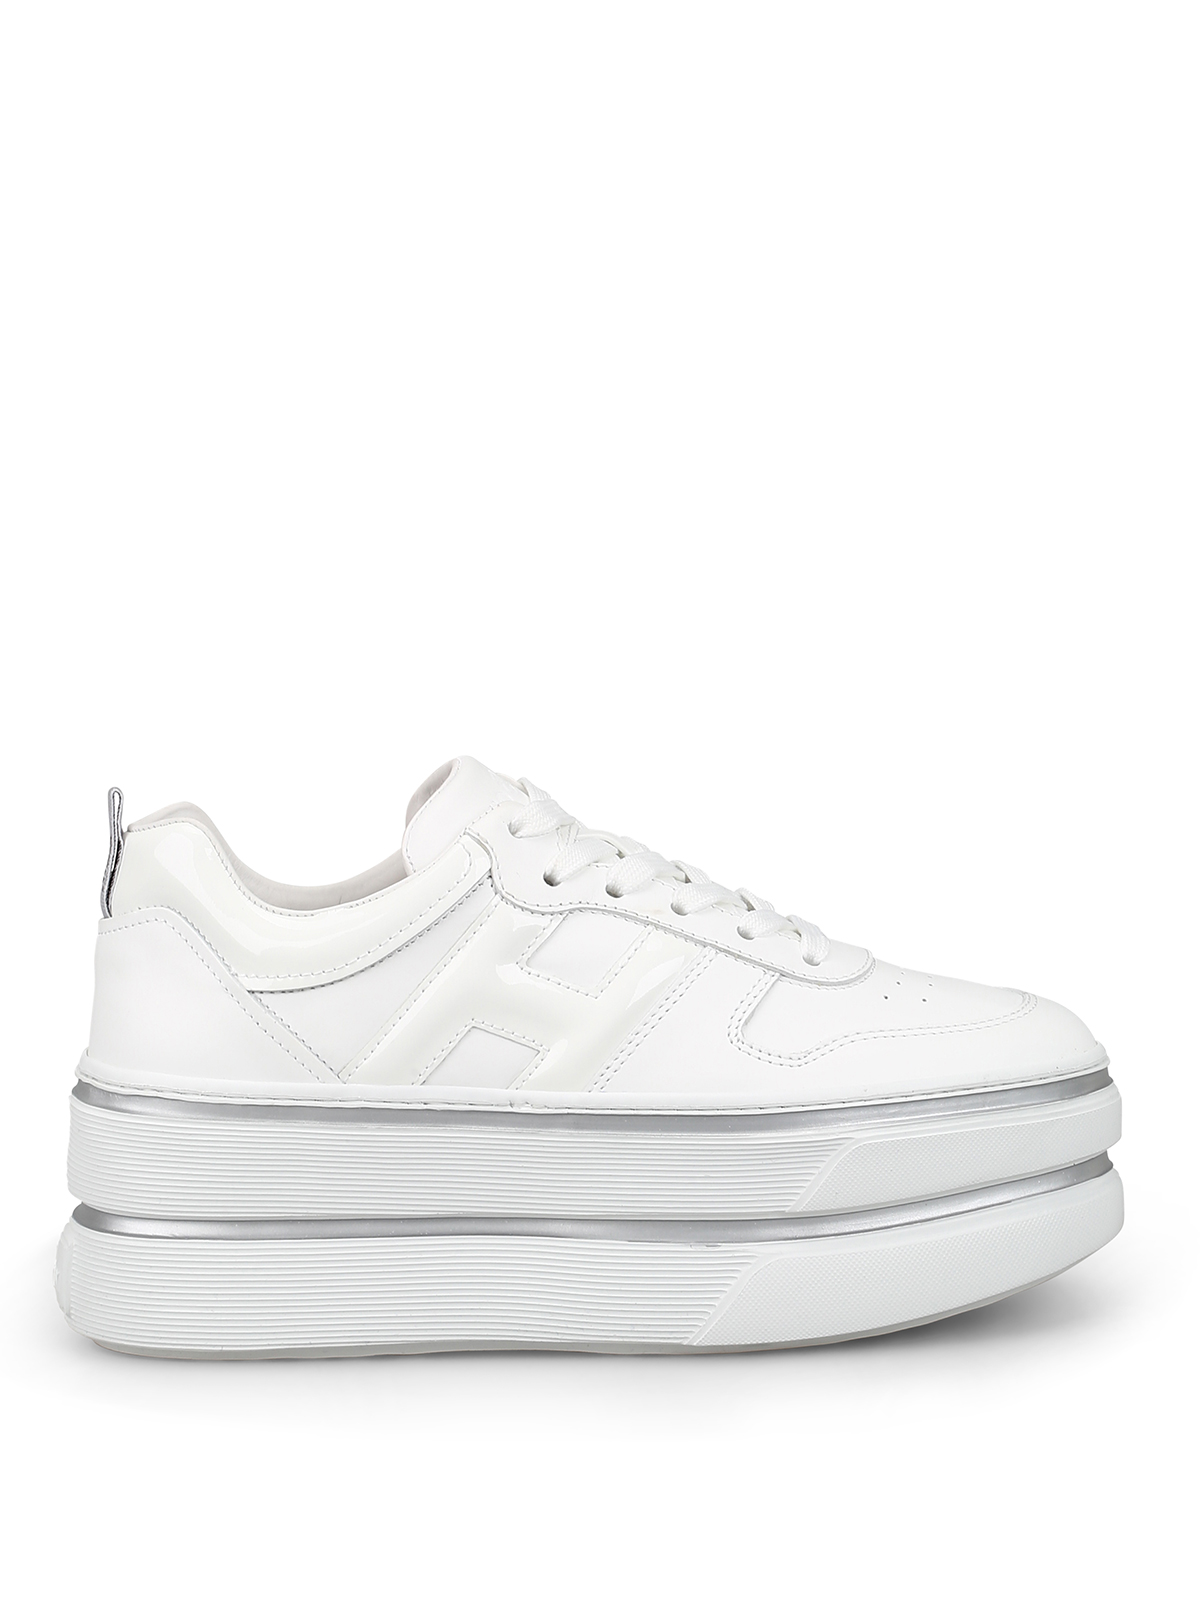 Hover Kenmerkend Arena Trainers Hogan - White platform sneakers - GYW4490BS00I6SB001 | iKRIX.com